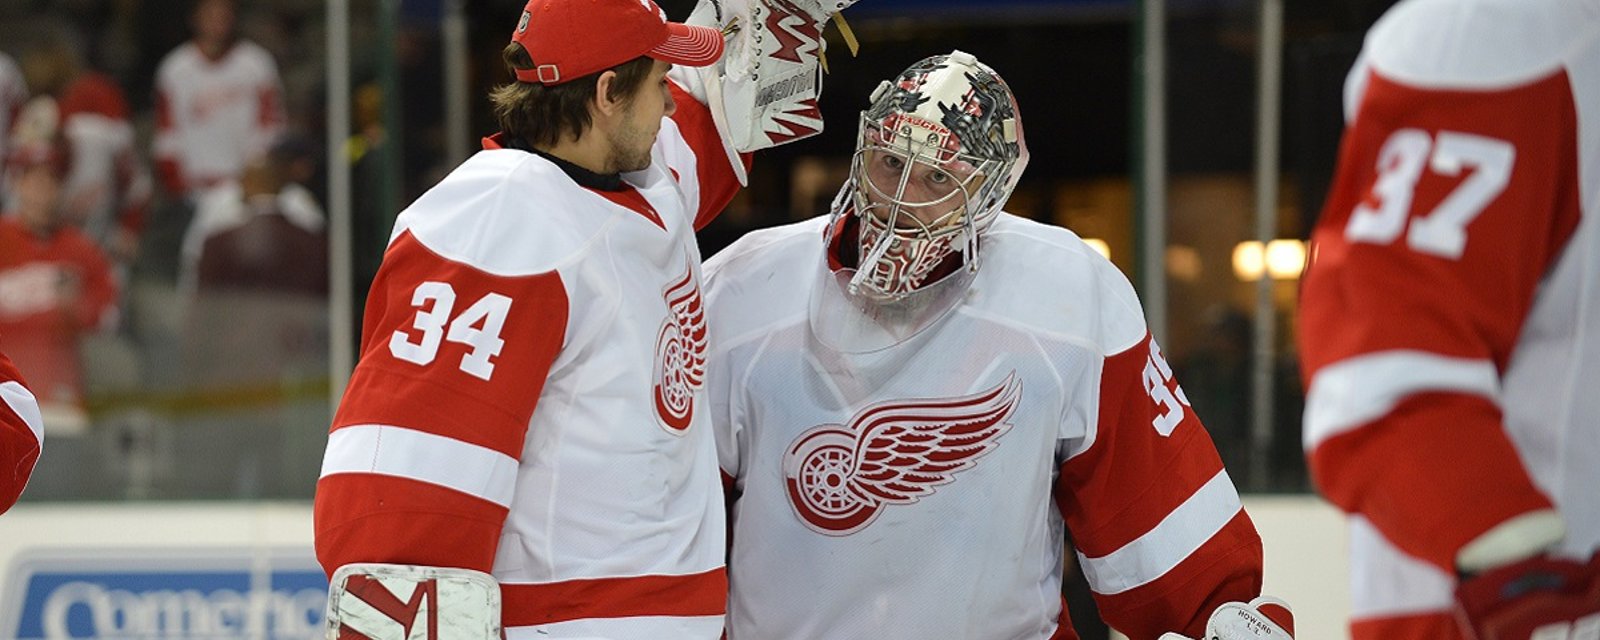 Breaking: Attitude issues may be behind Mrazek's exclusion from protected list.